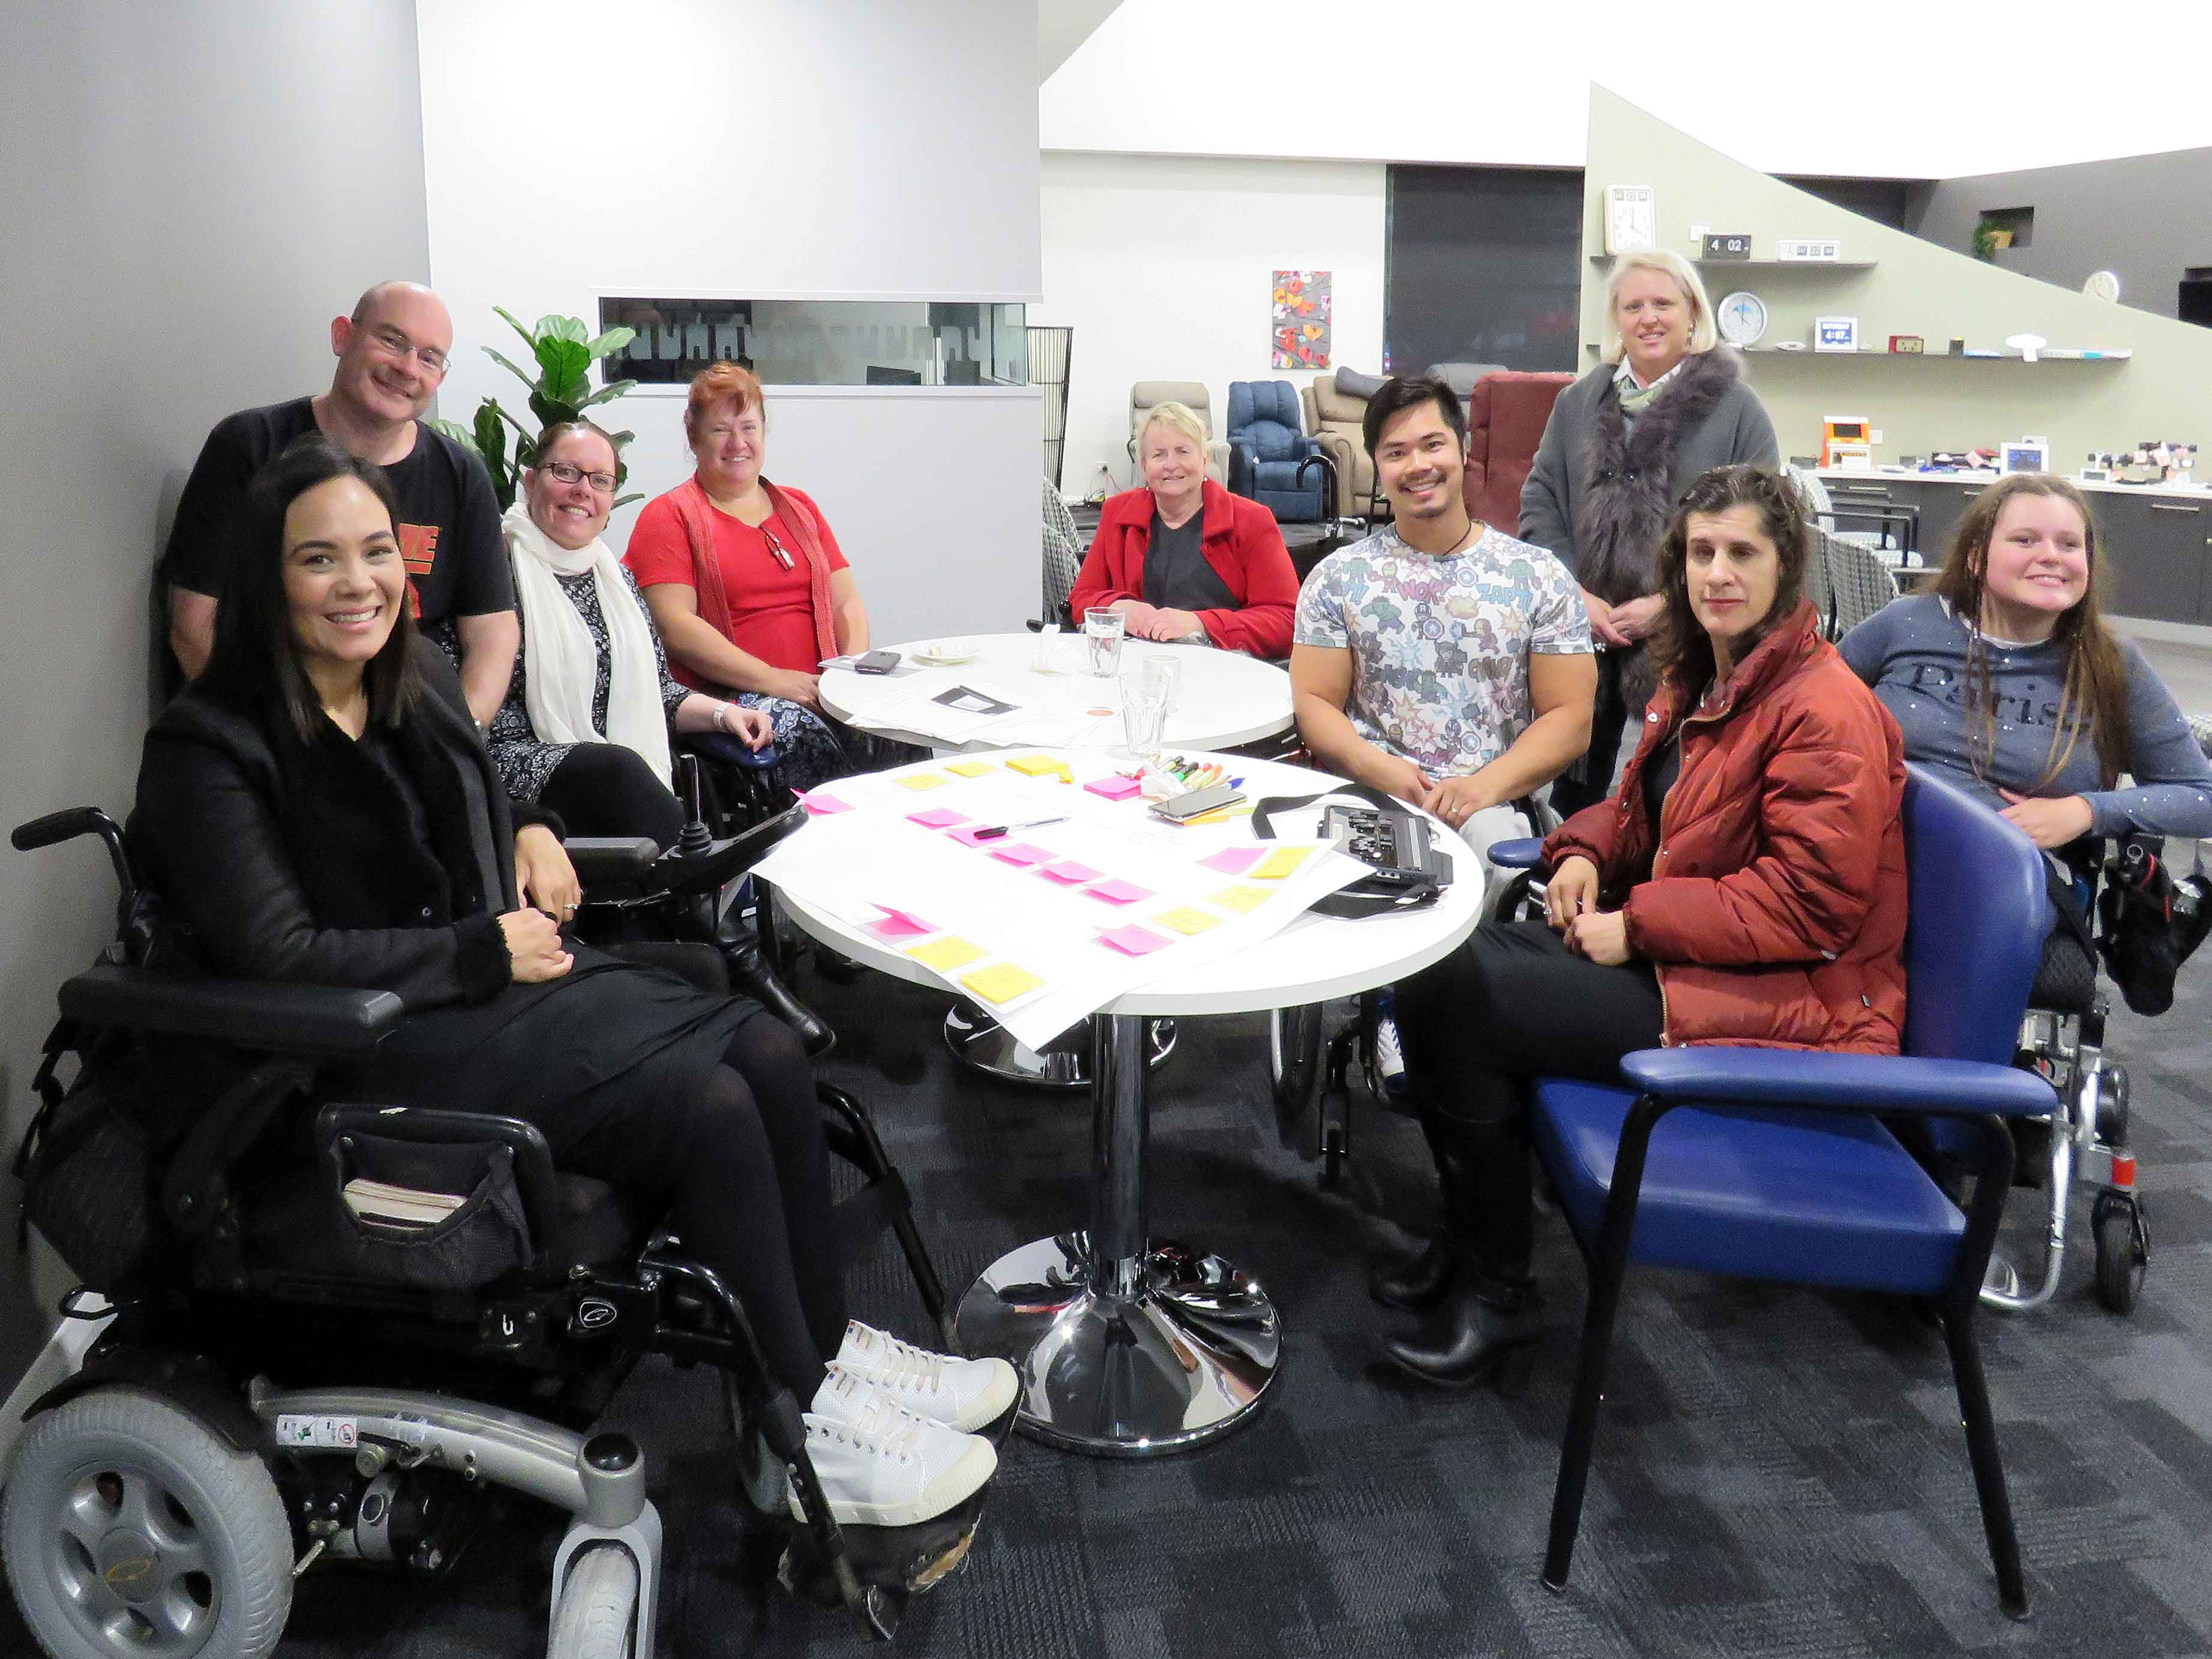 A group of people with disability are seated around a table with papers and pens in front of them.